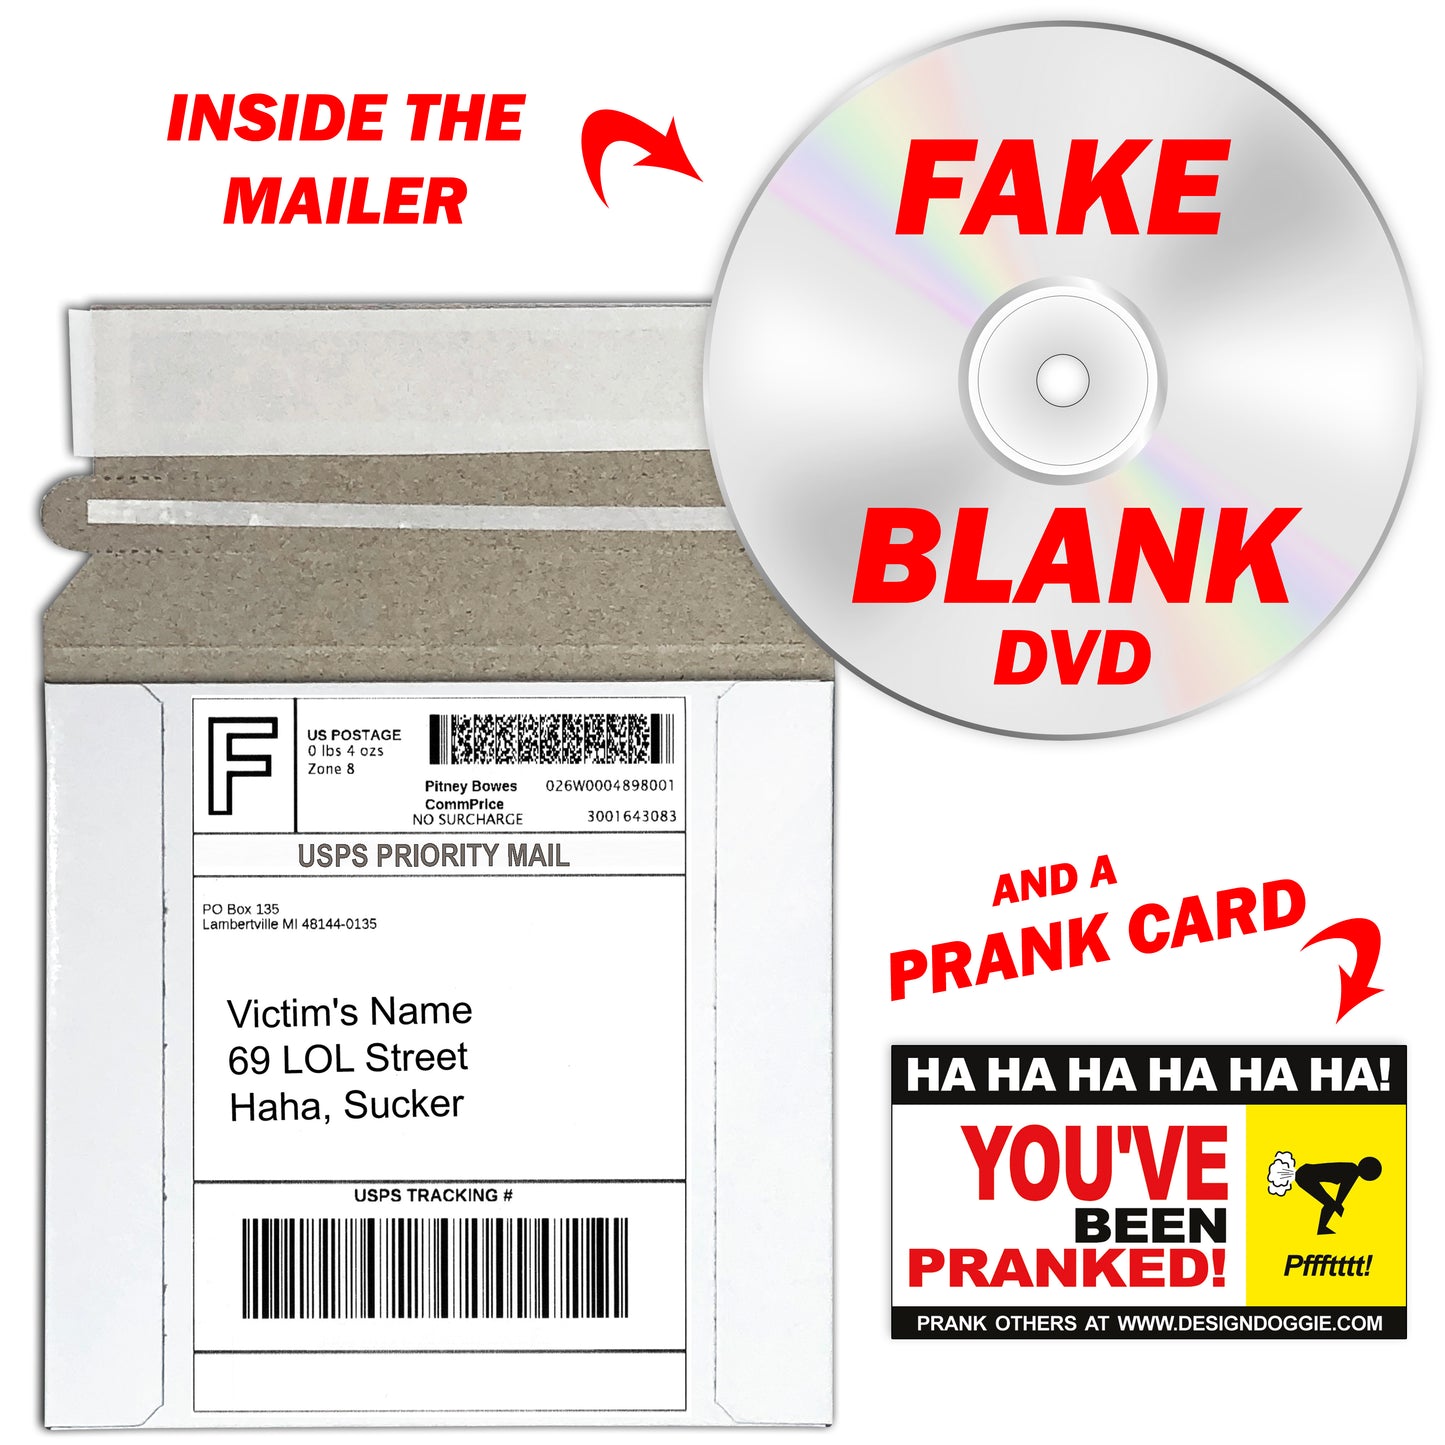 How To Make Money Selling Your Own Feet Pics Fake DVD mail prank gets sent directly to your victims 100% anonymously!